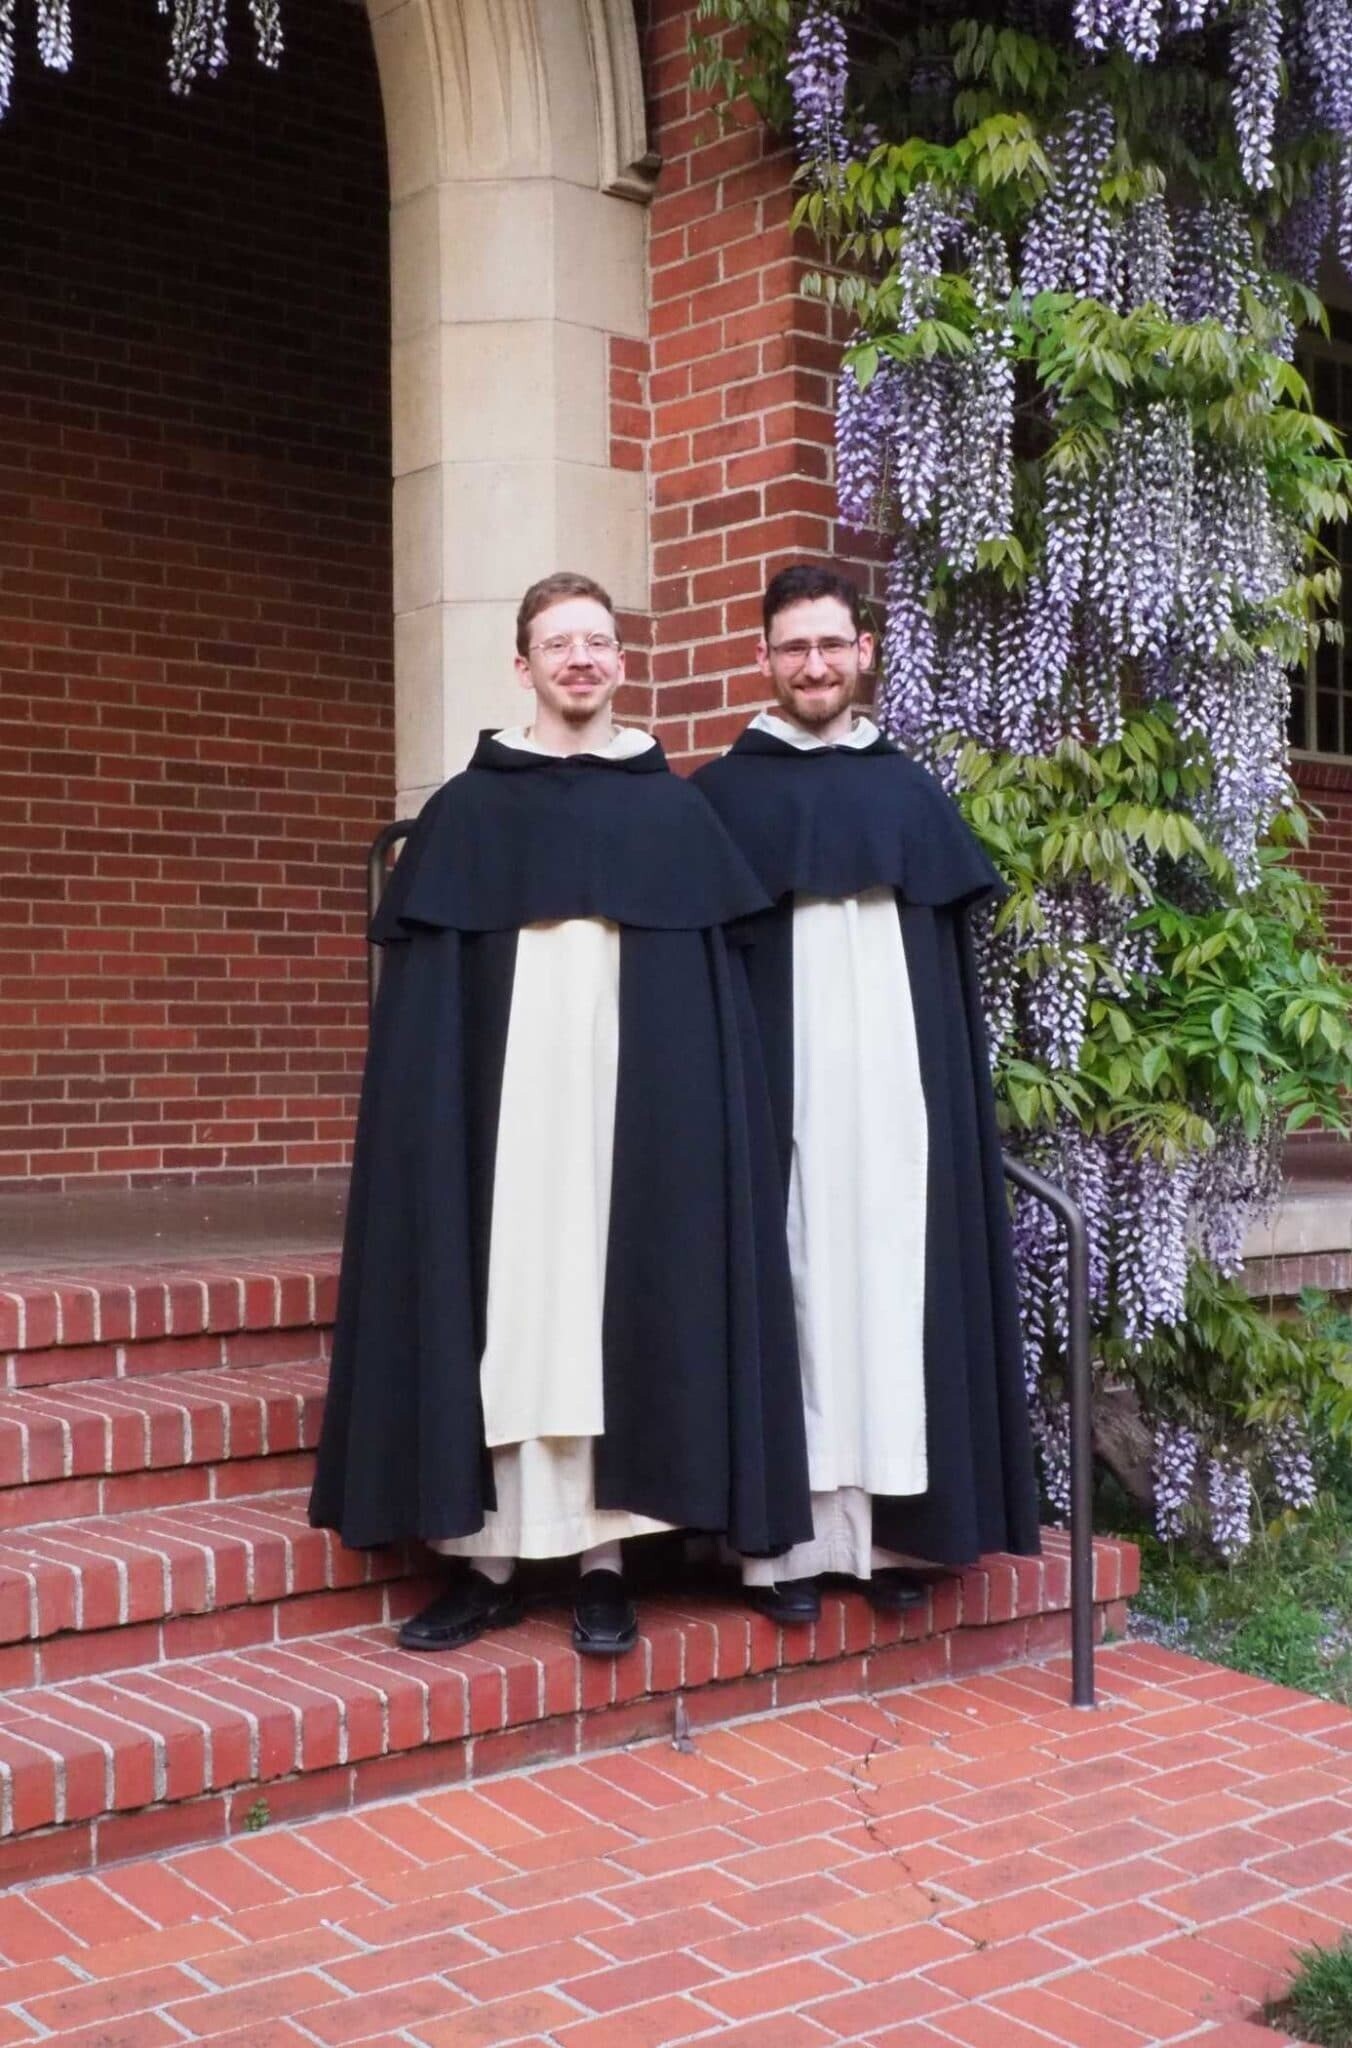 Solemn Vows 2021 — Dominican Friars Province Of The Most Holy Name Of